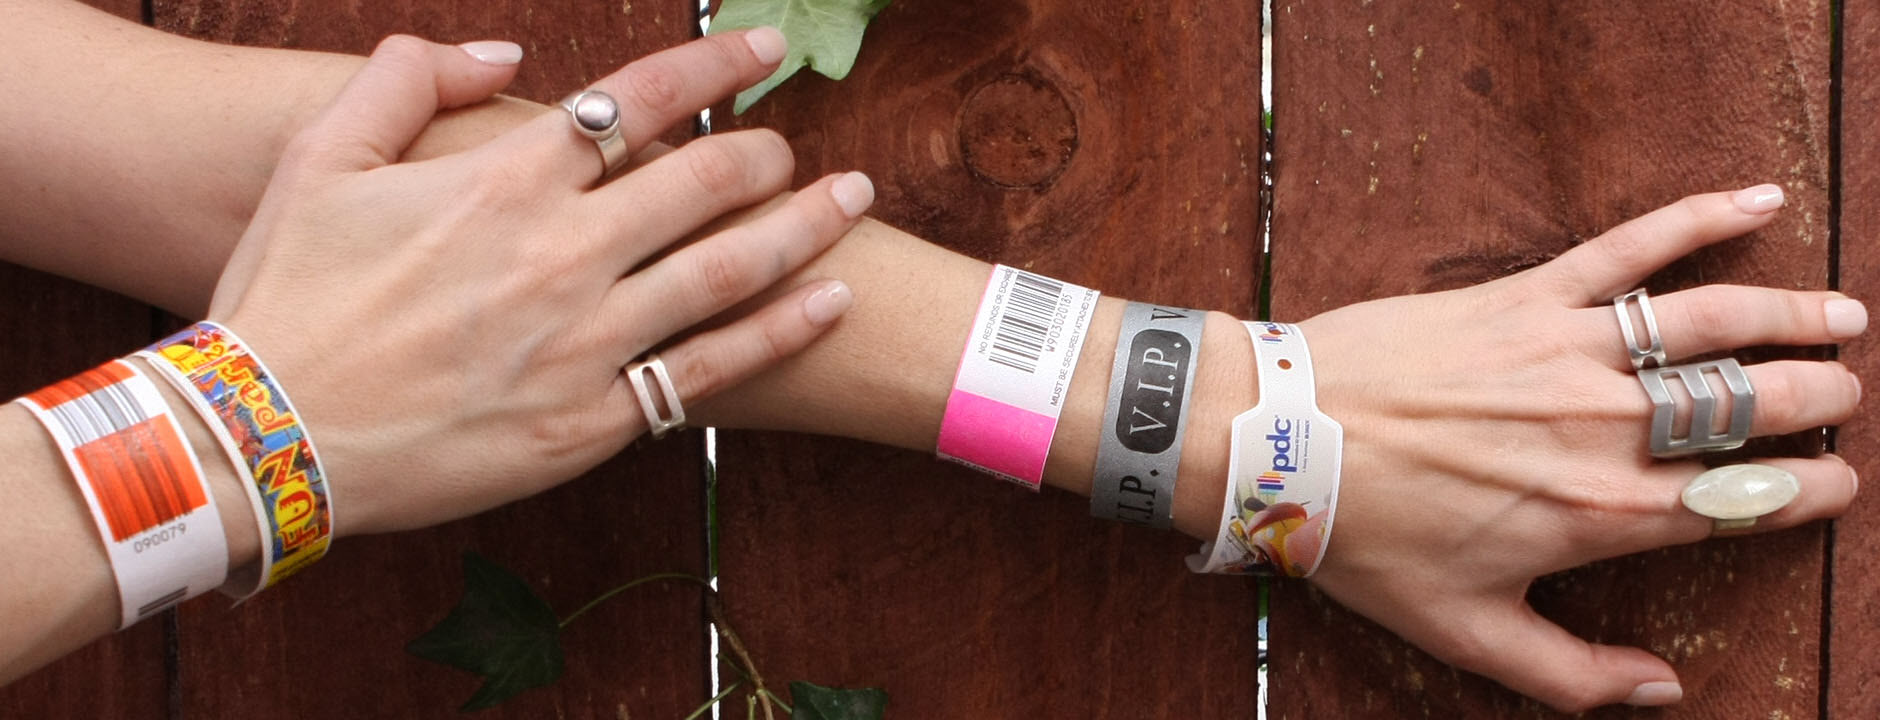 7 Tips for Designing Your New Custom Wristbands